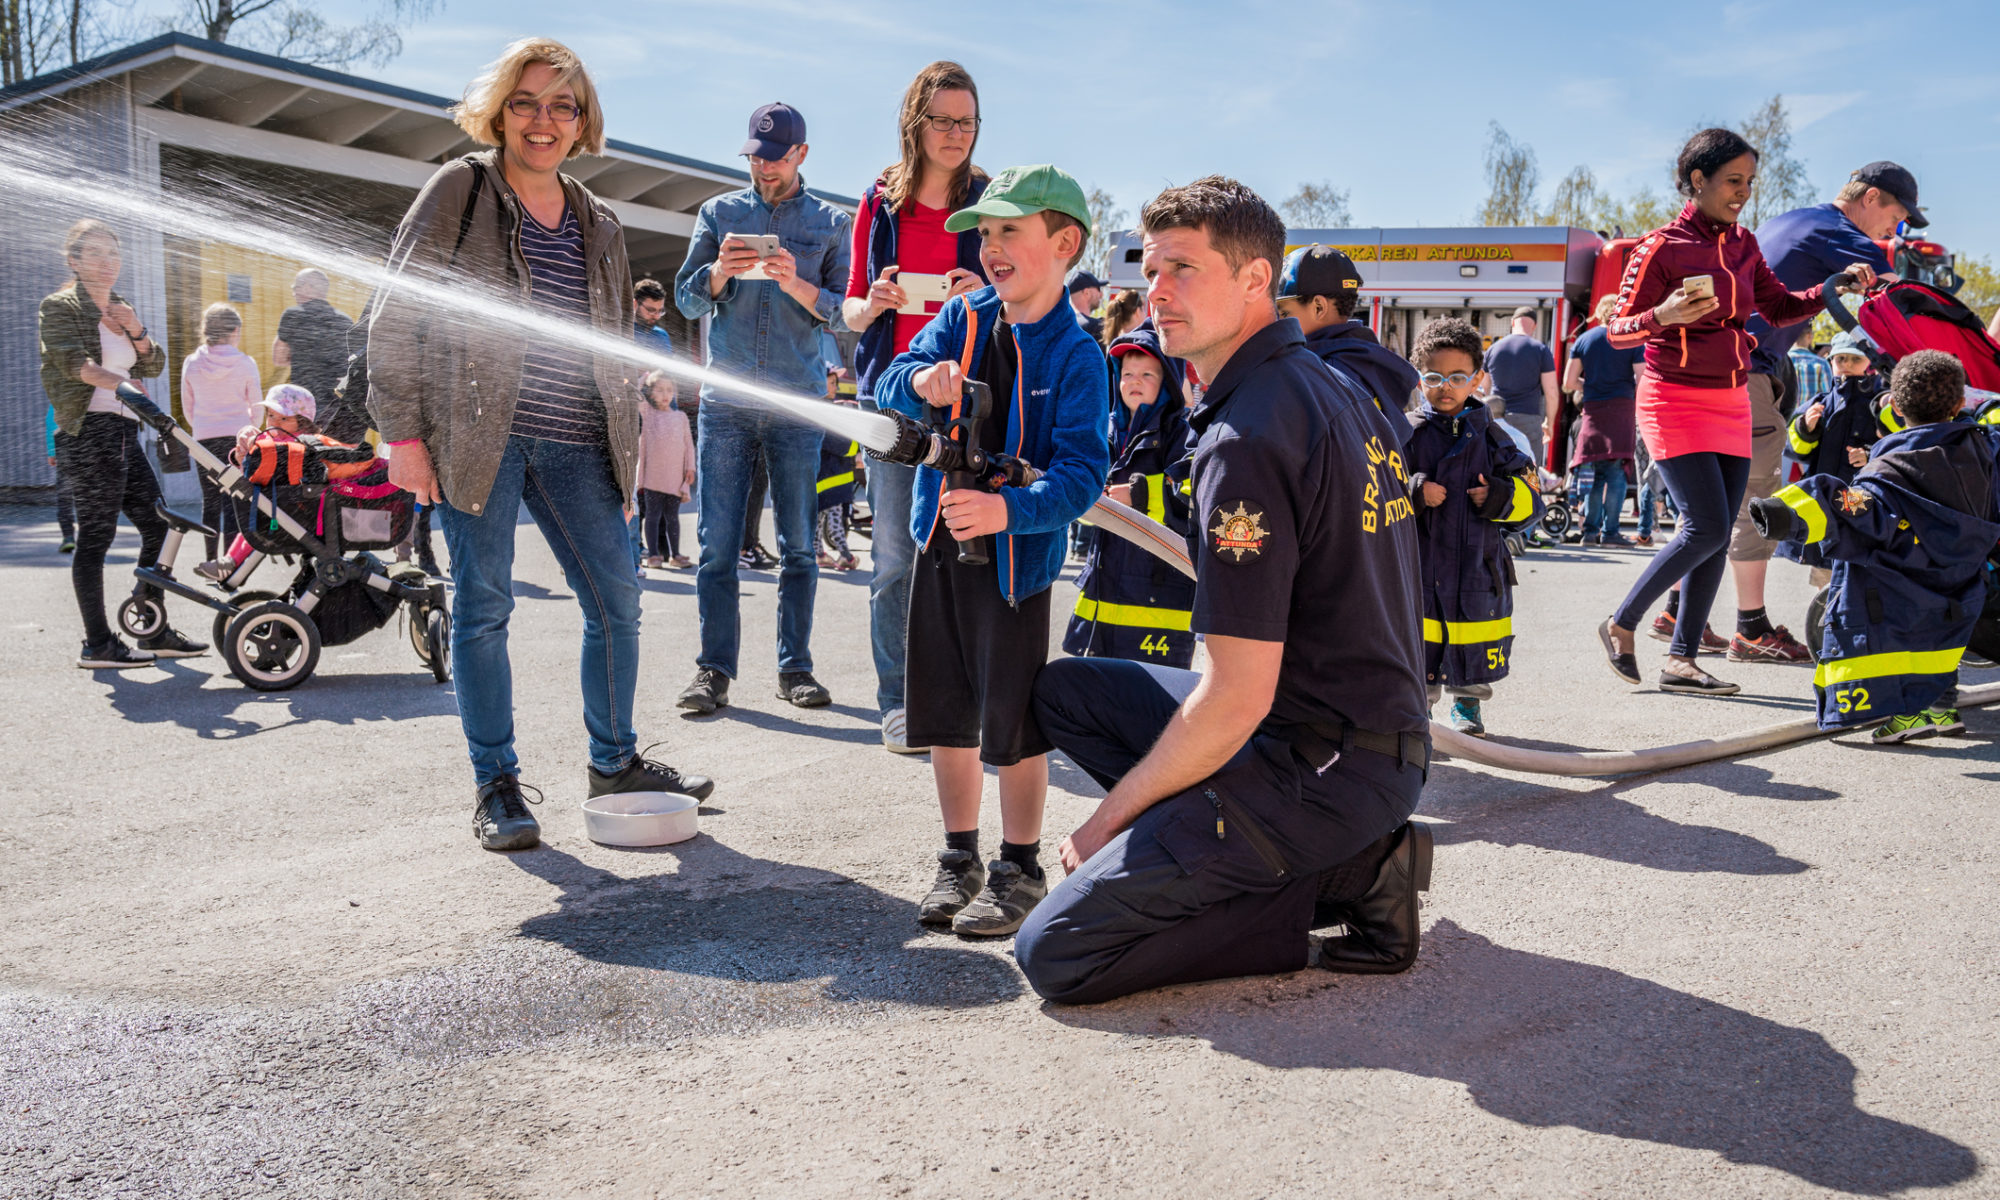 Since 1922, the National Fire Protection Association has sponsored the public observance of Fire Prevention Week. Throughout the past century, fire prevention week consisted of children and adults learning how to stay safe in case of a fire.